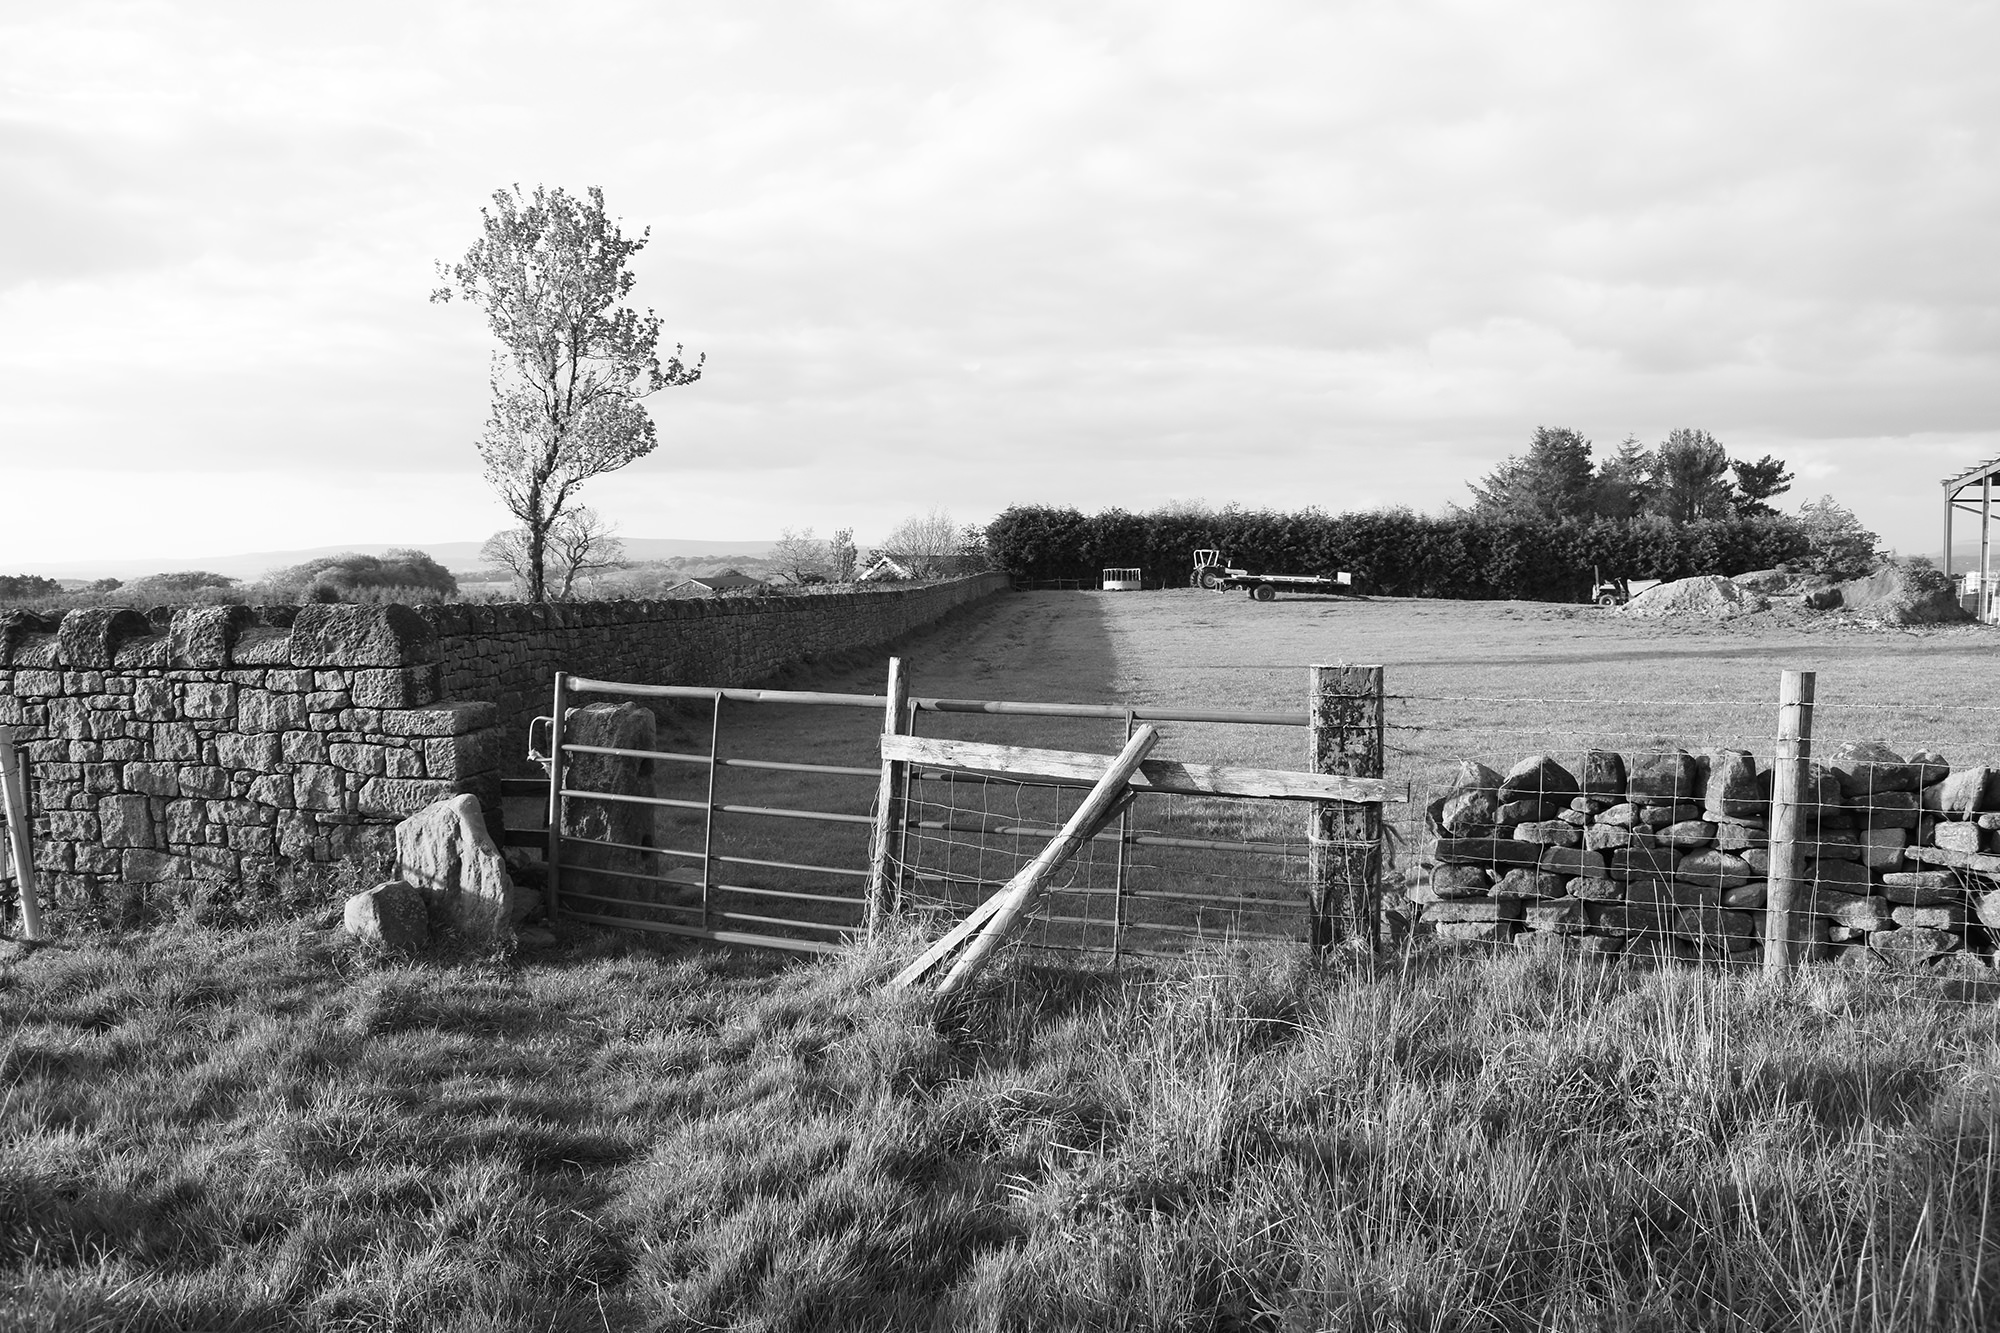 Photograph of Gate in Withnell, Lancashire